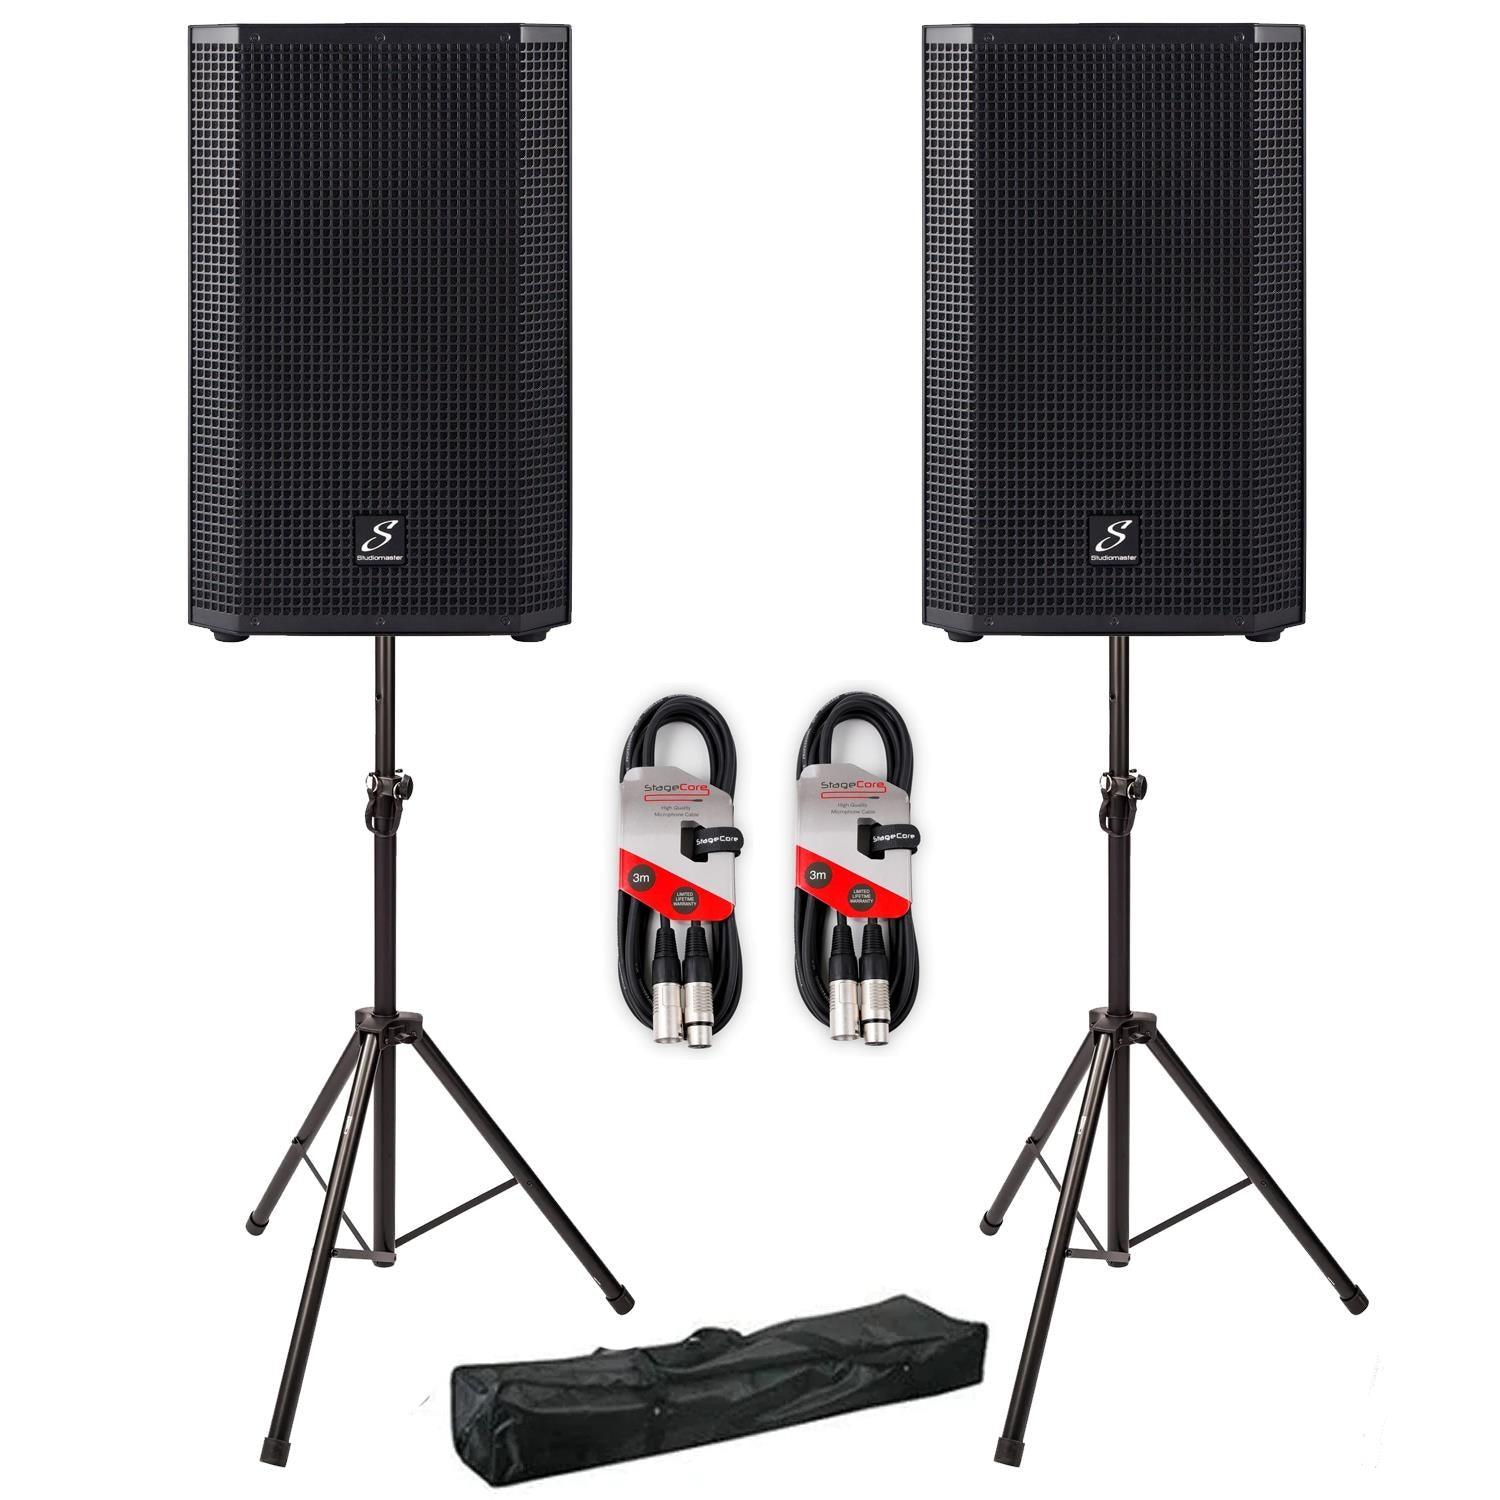 2 x Studiomaster Vortex 10A 10" Active Speaker with Stands & Cables - DY Pro Audio